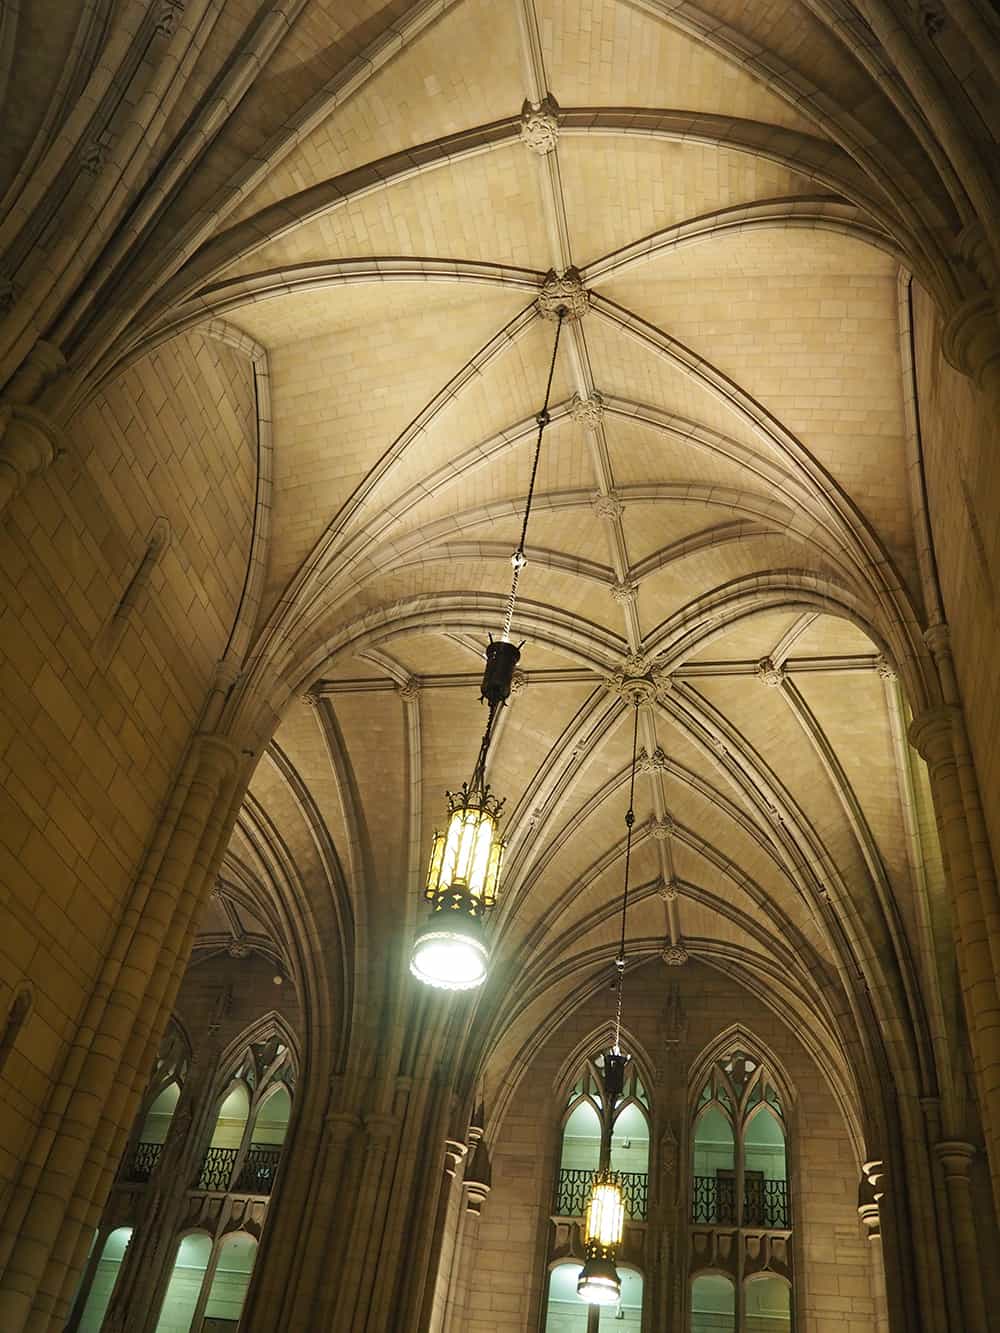 The Cathedral of Learning is the second largest gothic-styled architecture building in the world in Pittsburgh, Pennsylvania. The Cathedral of Learning is on University of Pittsburgh's campus and classes began in the 1930s. The arches in the common rooms are true arches with no steel supports. | affordable family day trip + places to visit in Pittsburgh, Pennsylvania via Autumn All Along